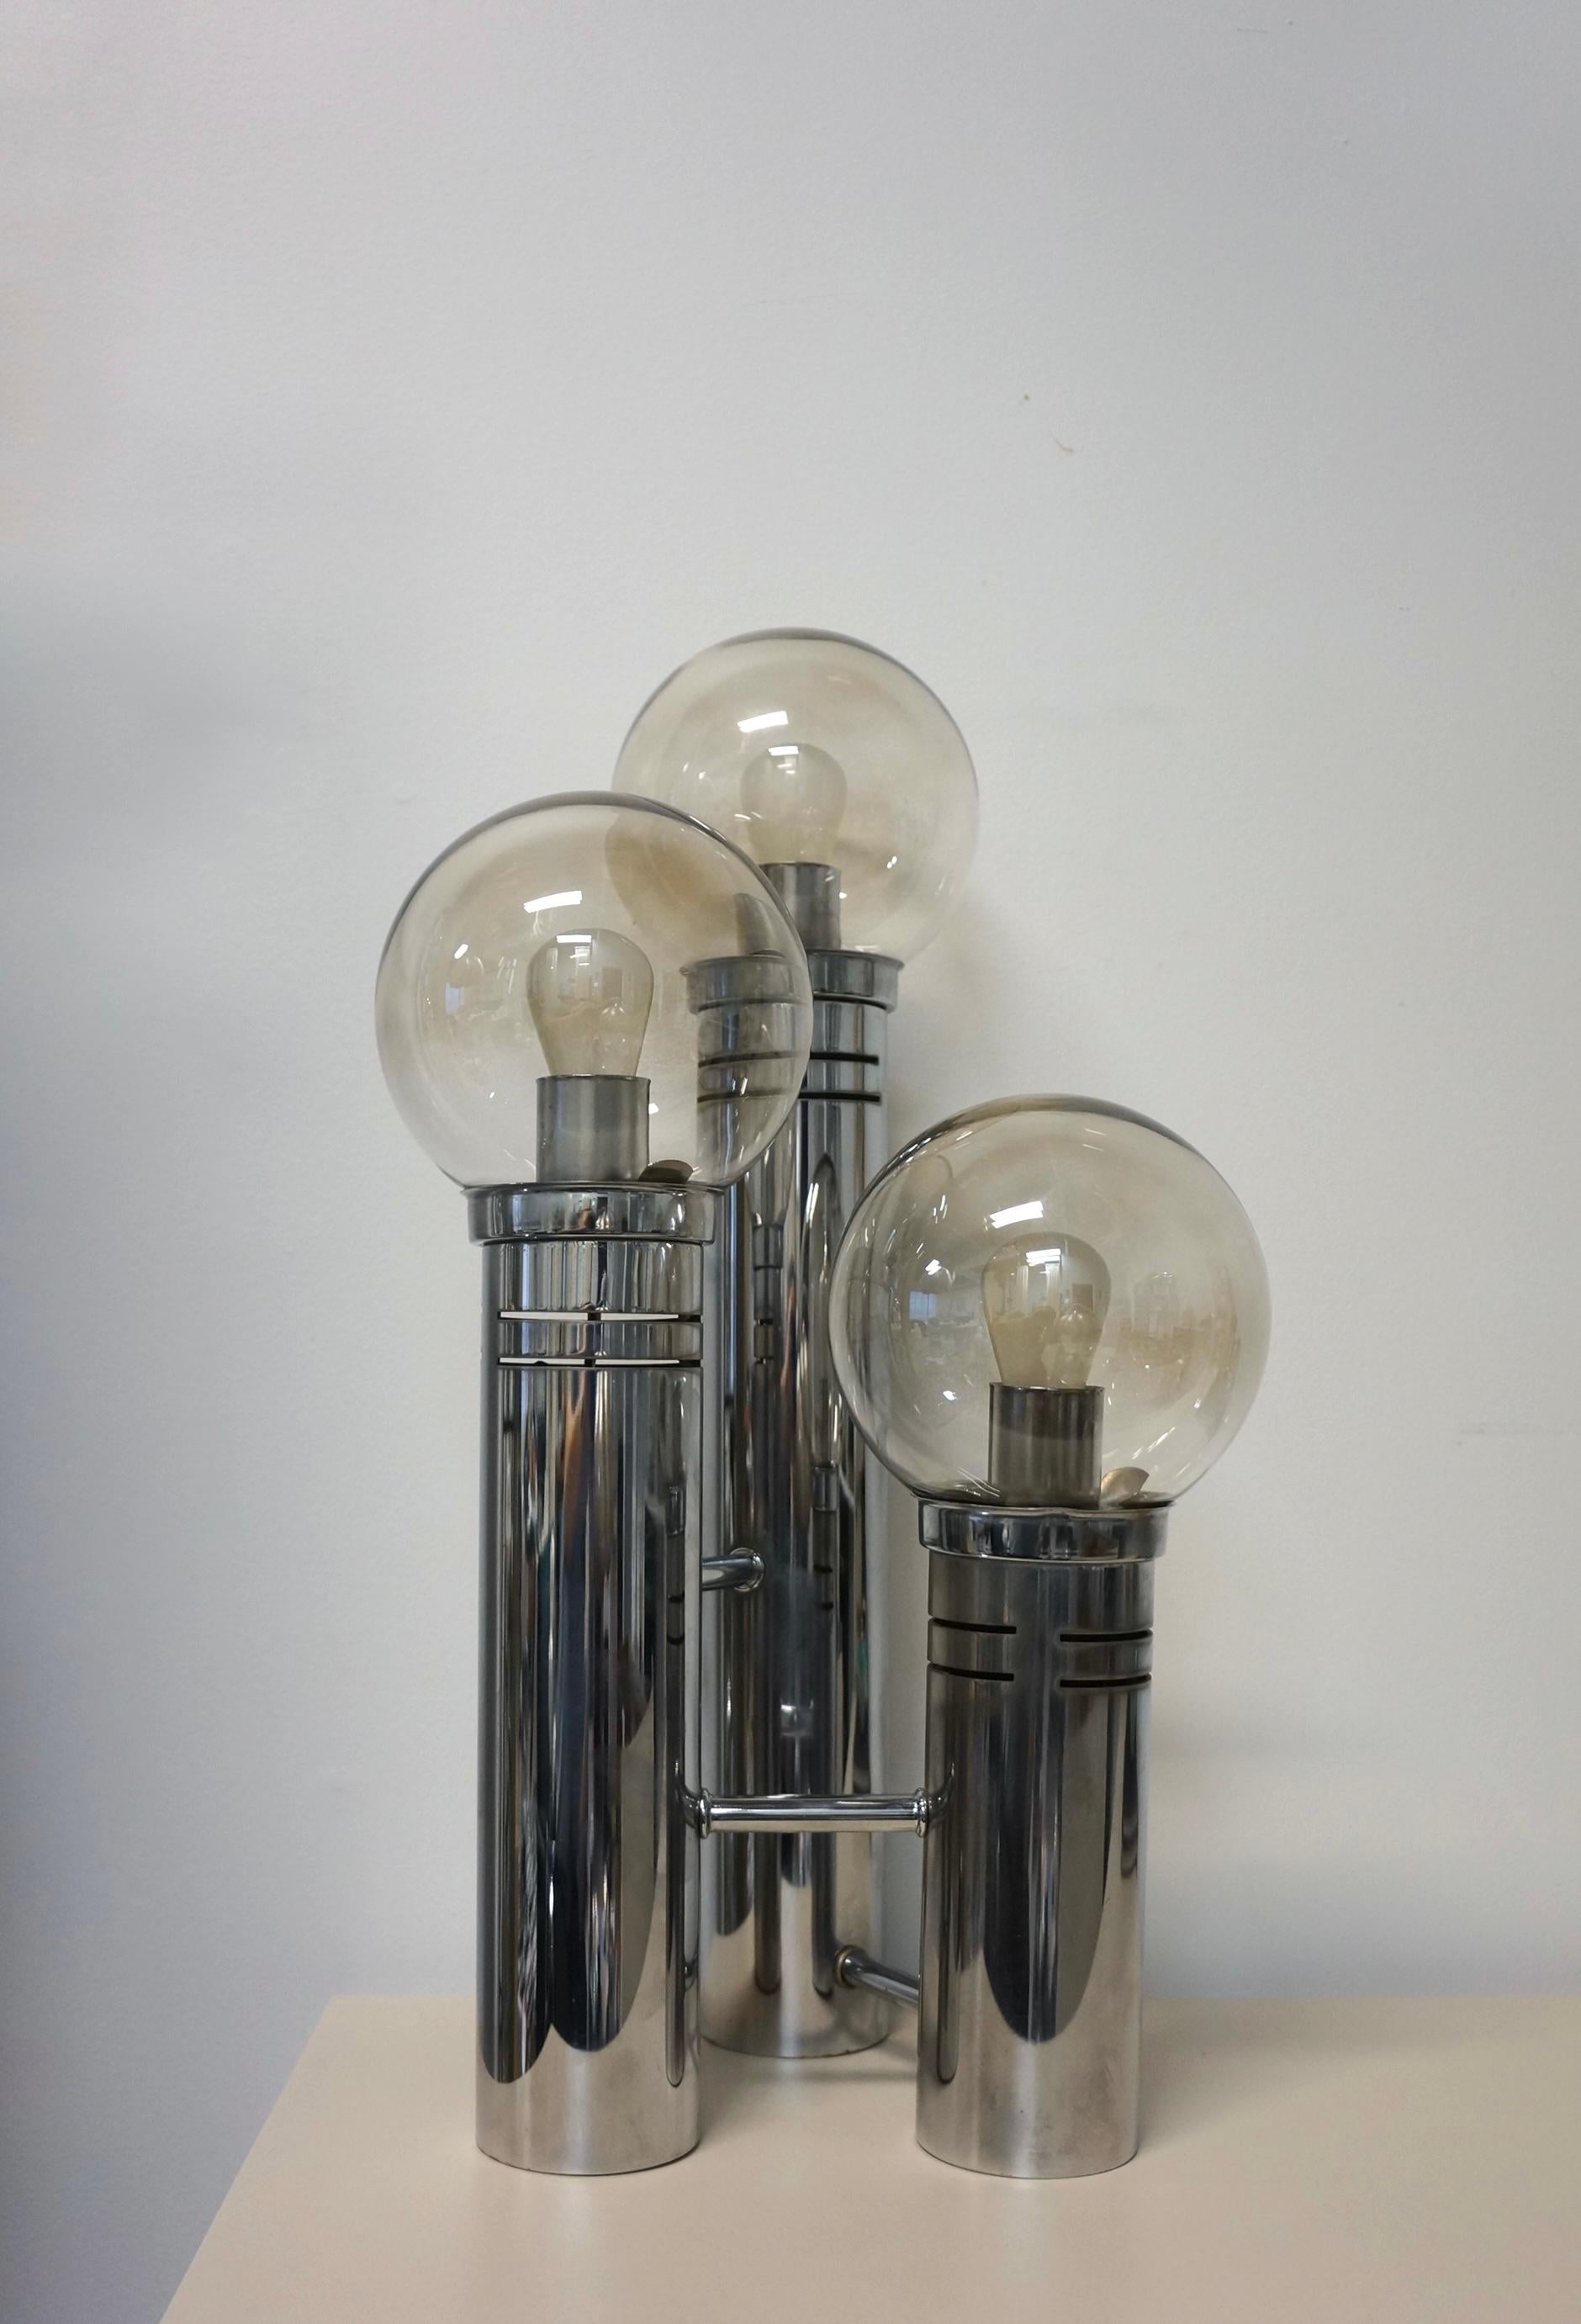 Stunning glass globe and chrome table lamp. This lovely lamp has three cylindrical tiers in varying heights that are connected at the chrome base featuring three glass globes. The slightly tinted glass globes cover the light bulbs. The glass globes